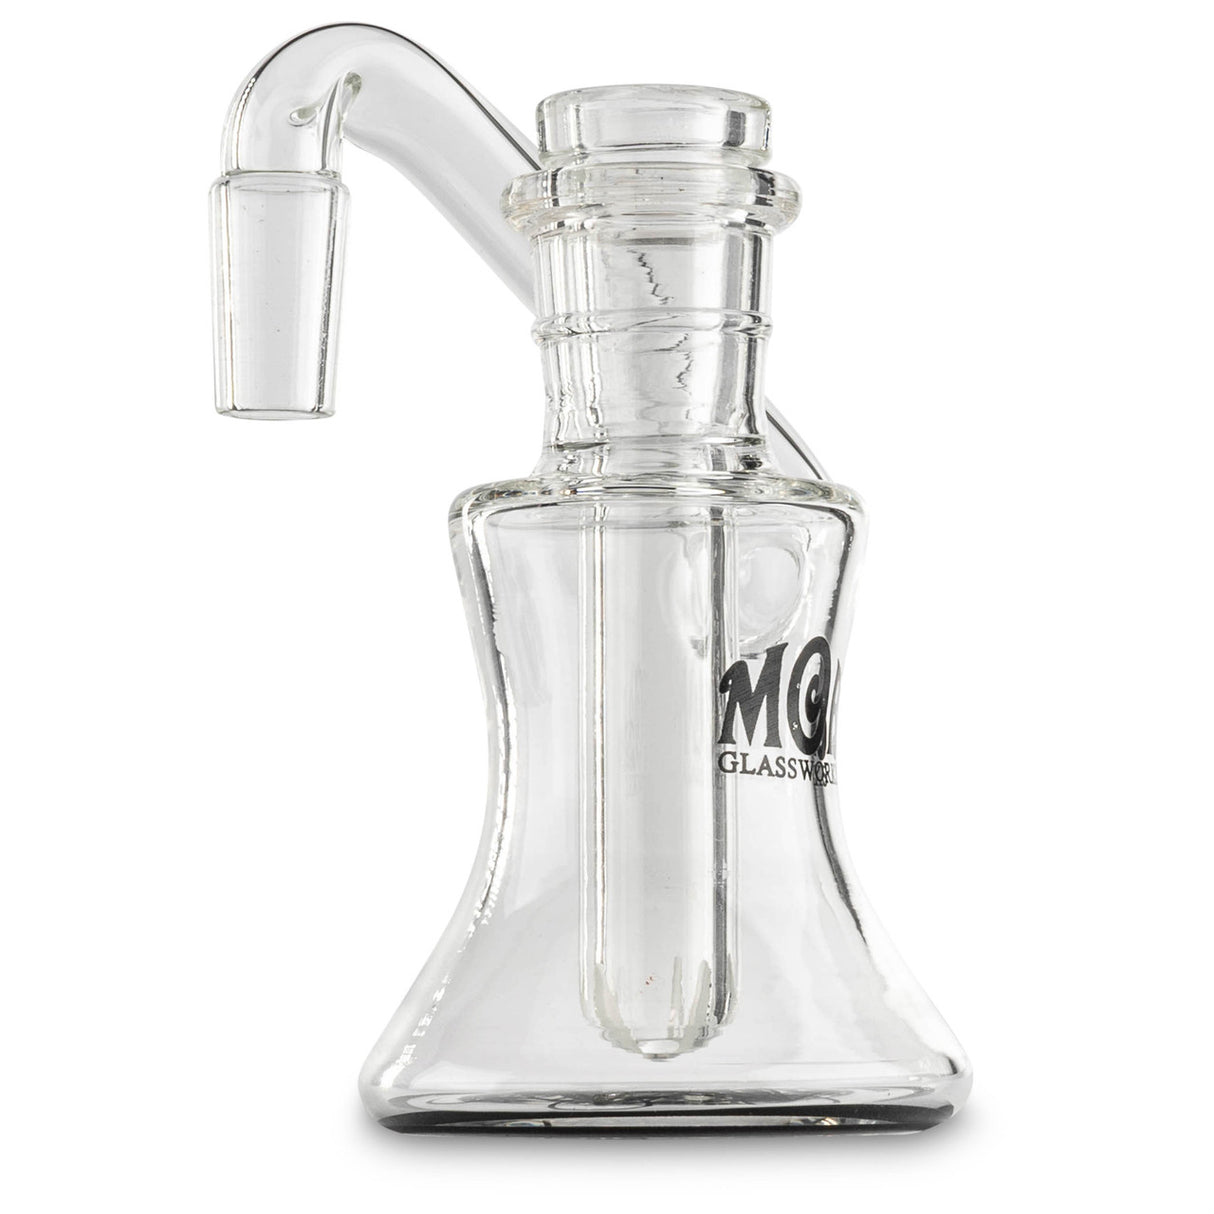 Mob Reclaim Ash Catcher 18mm 90* - No More Fallen Bud! Introducing the MOB  Reclaim Ash Catcher All tokers know the fun experiences that come from  taking rips out of their favorite